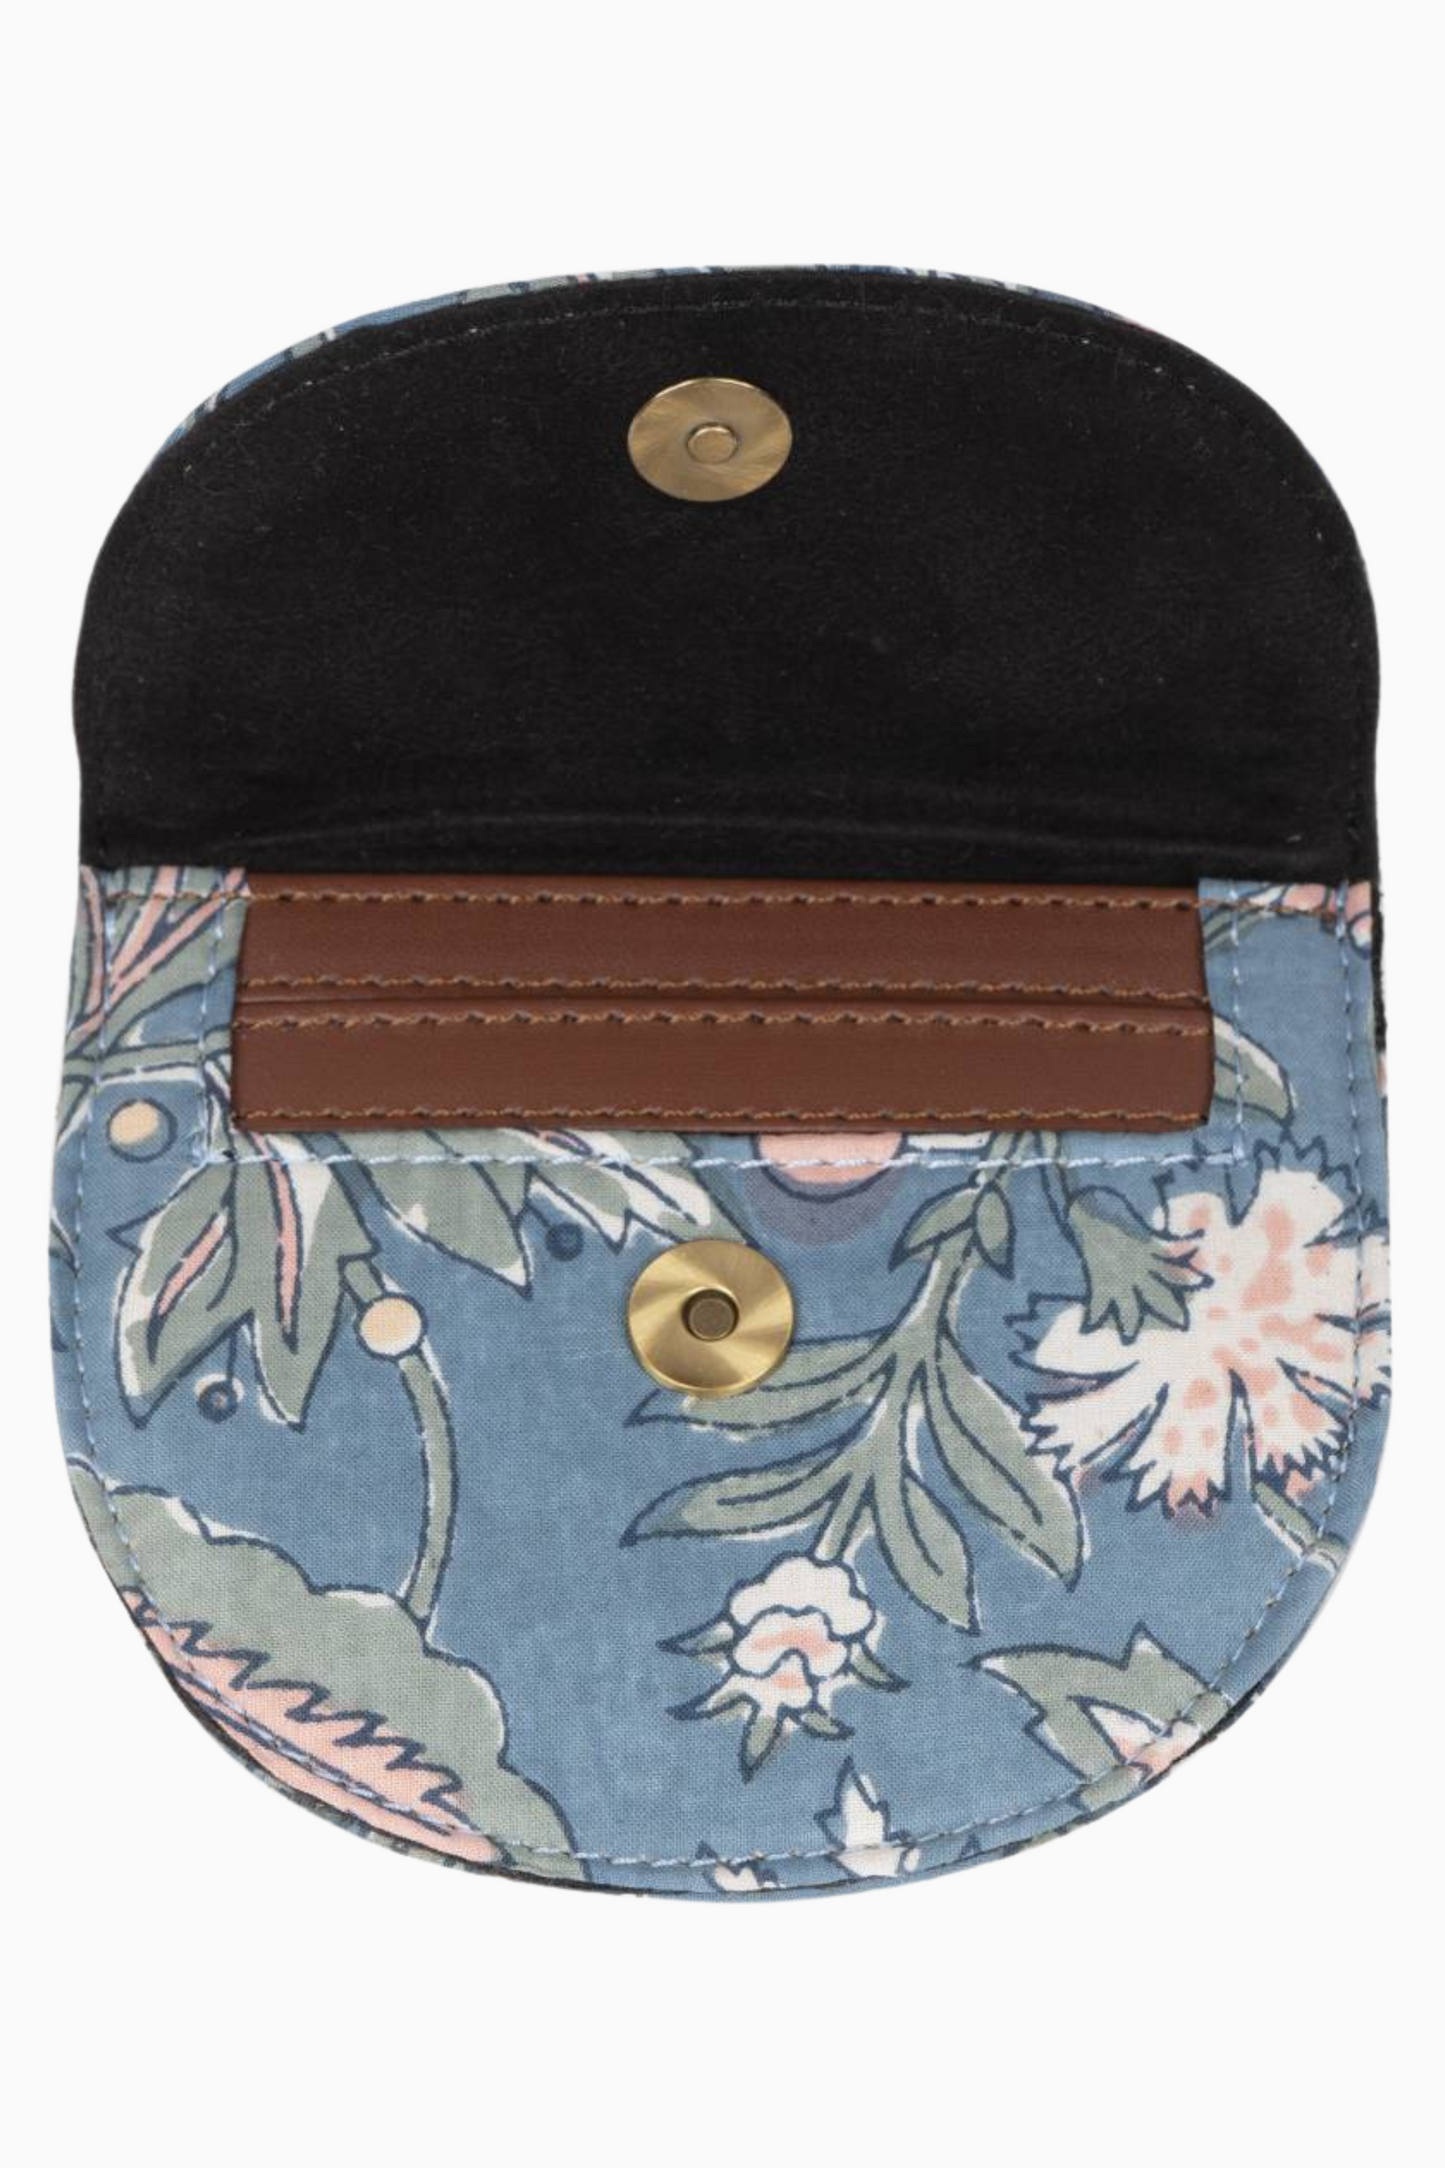 Floral Fantasy Blockprinted Coin Pouch